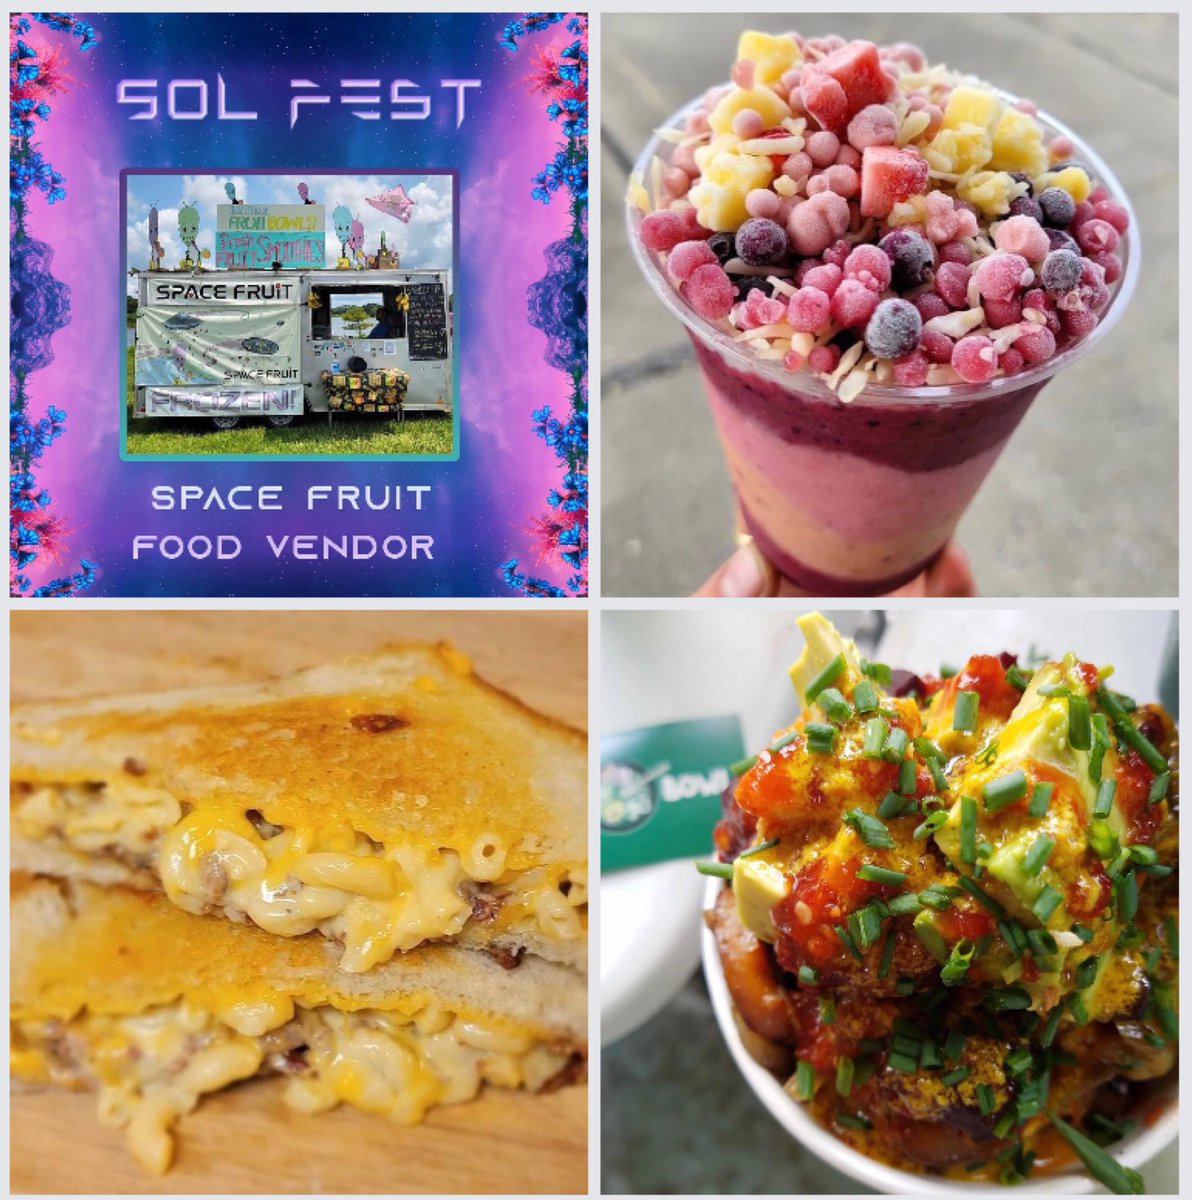 Here’s a taste of some of the Sol Fest food vendors! 😋 

#food #foodvendors #festivalfood